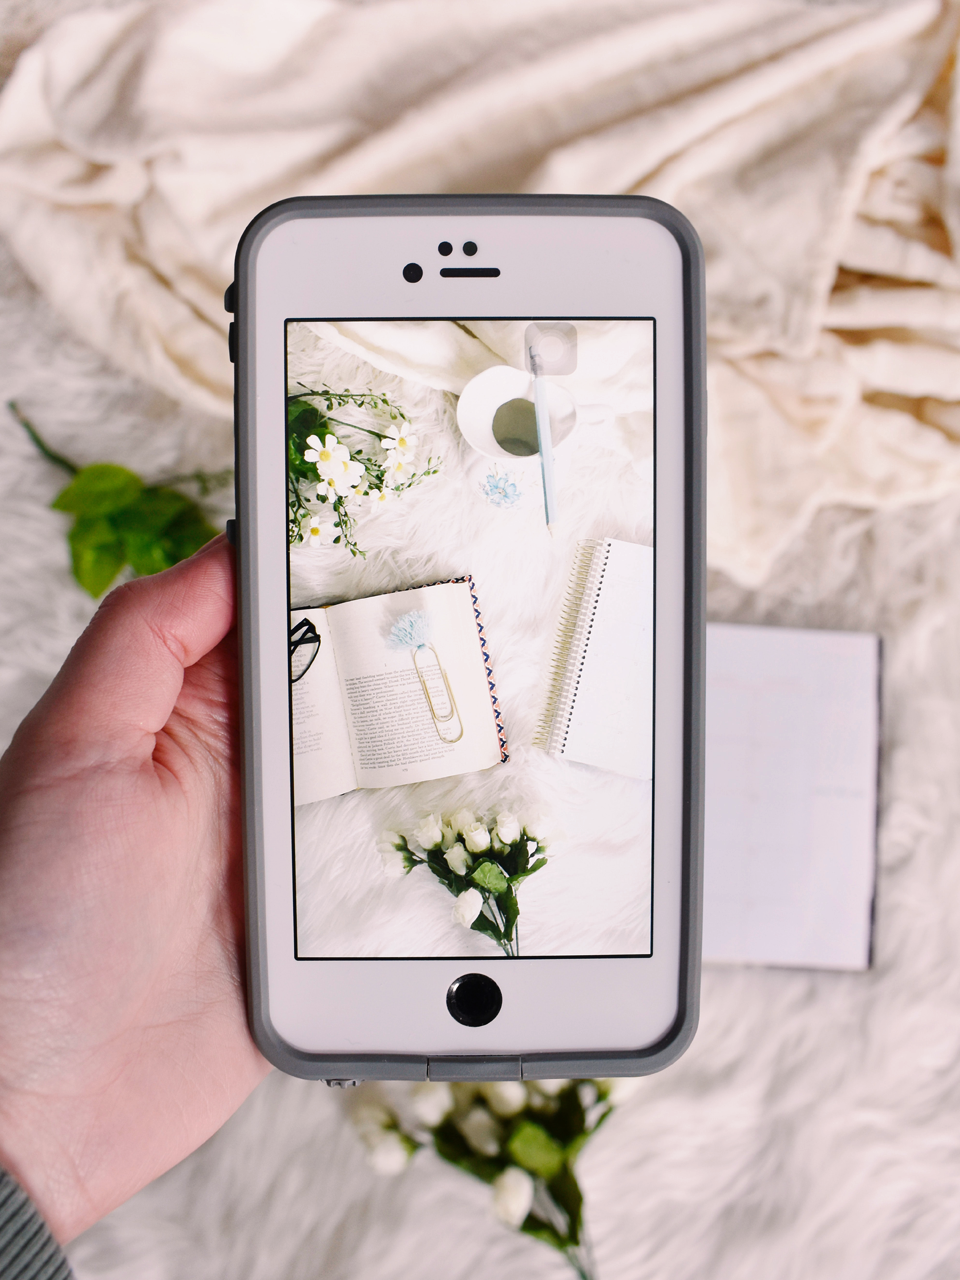 professional influencer creates a flatlay image with phone